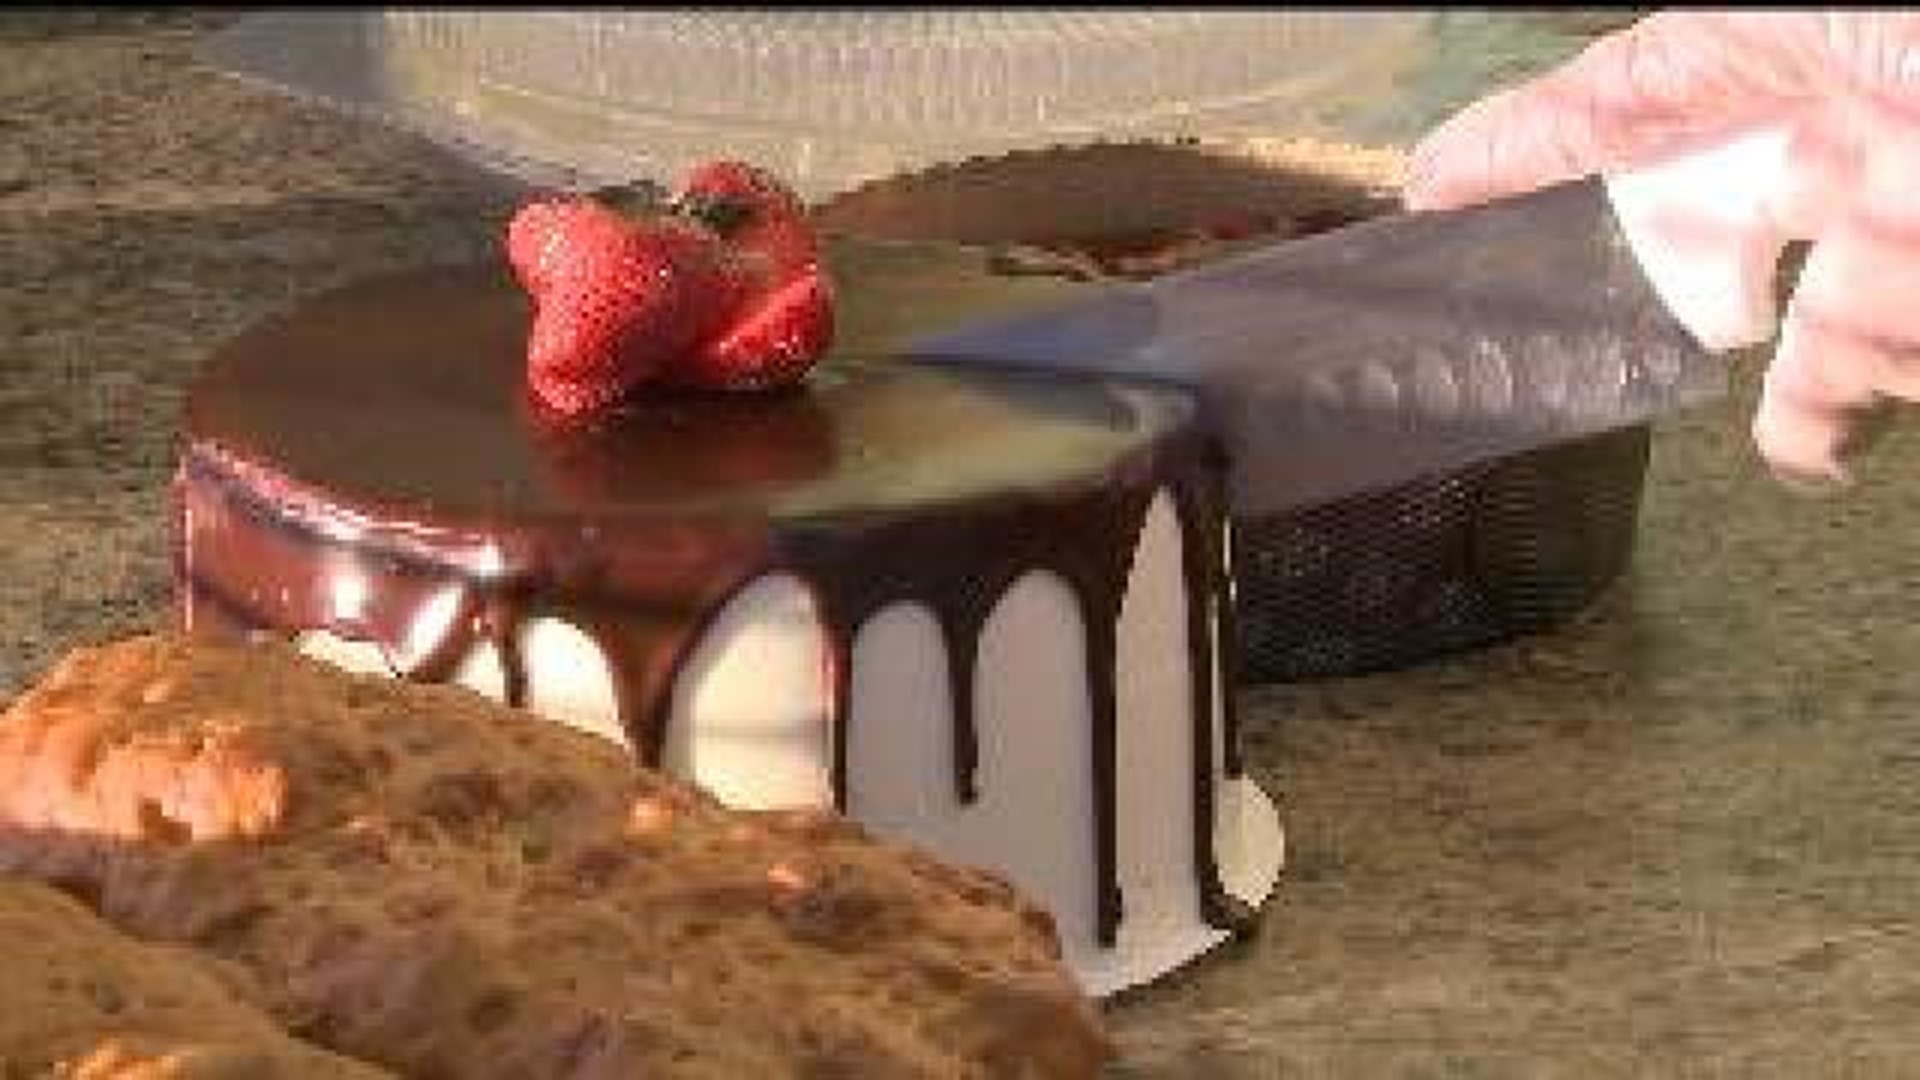 New business offers gluten-free treats in the QCA